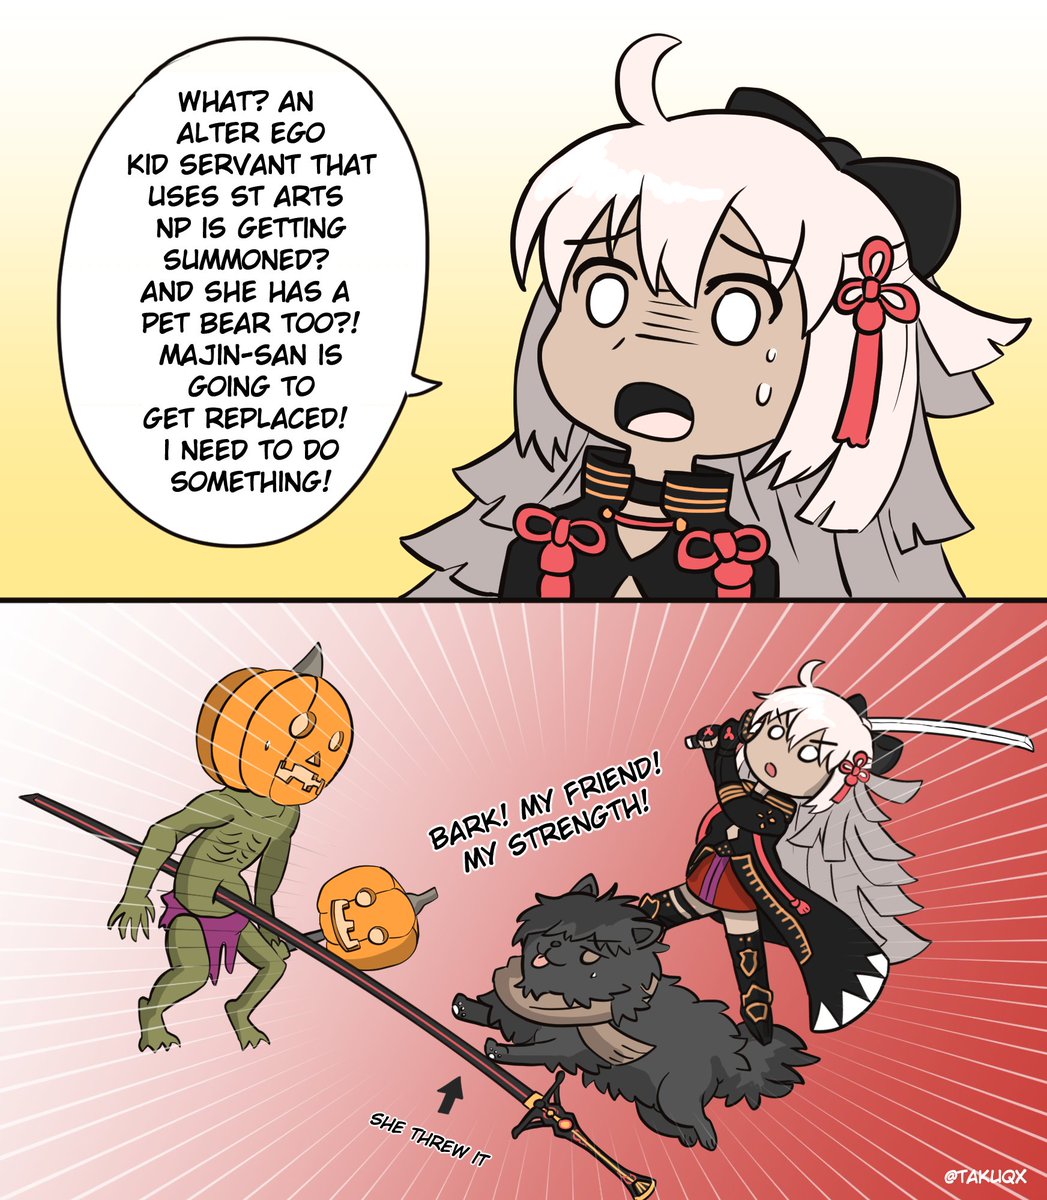 Little Okitan stepping up her game #FGO #FateGO 